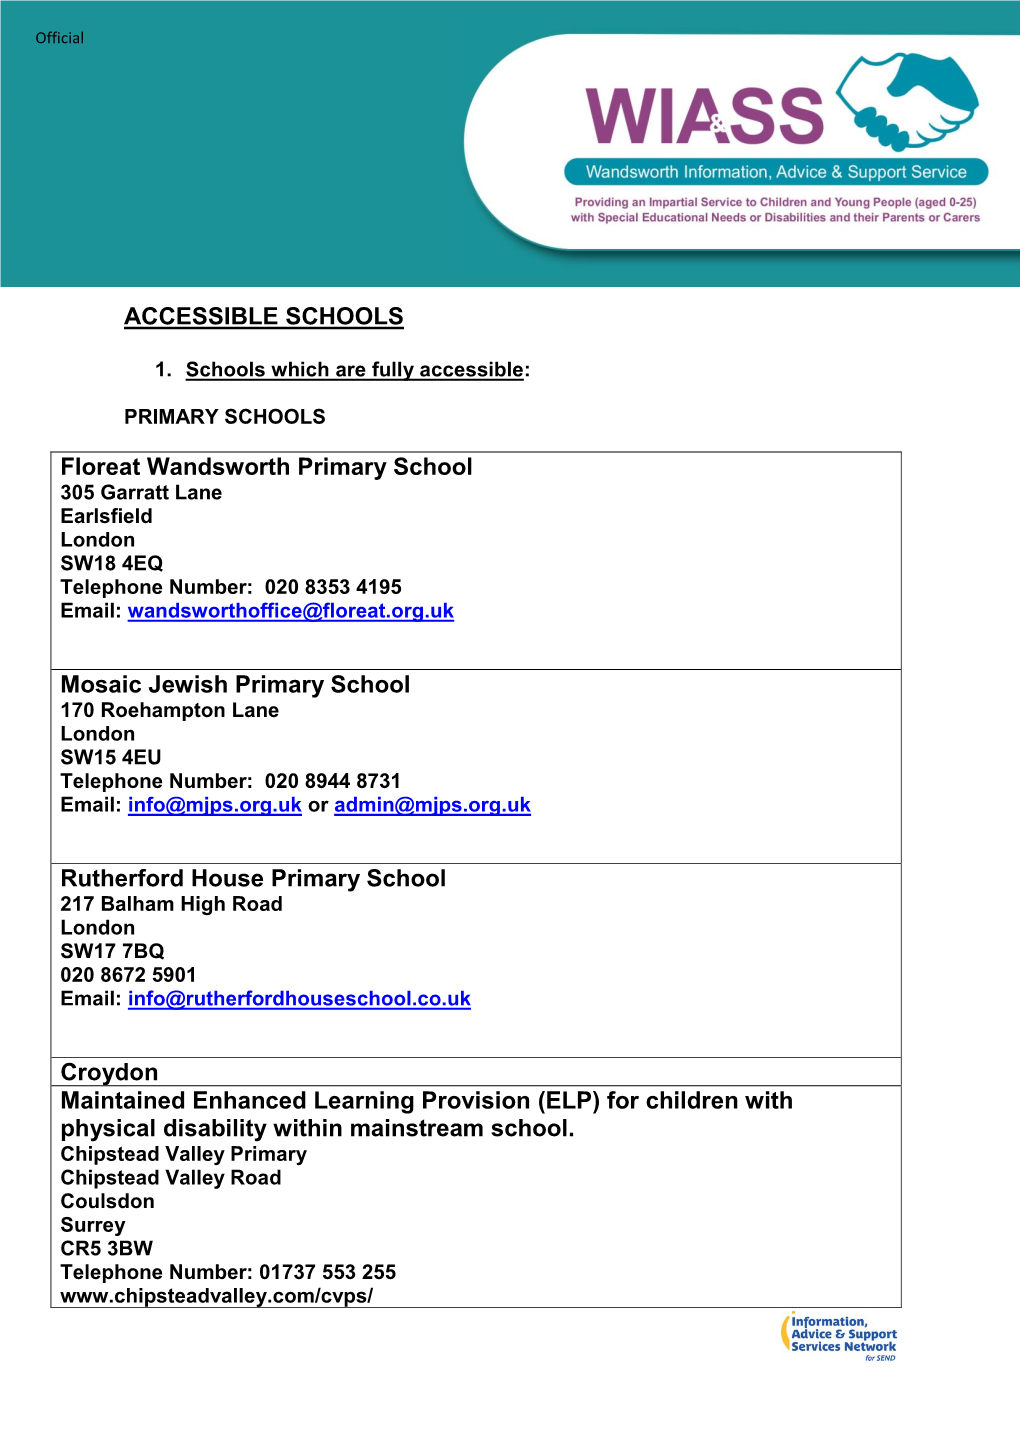 A List of Fully Accessible Schools